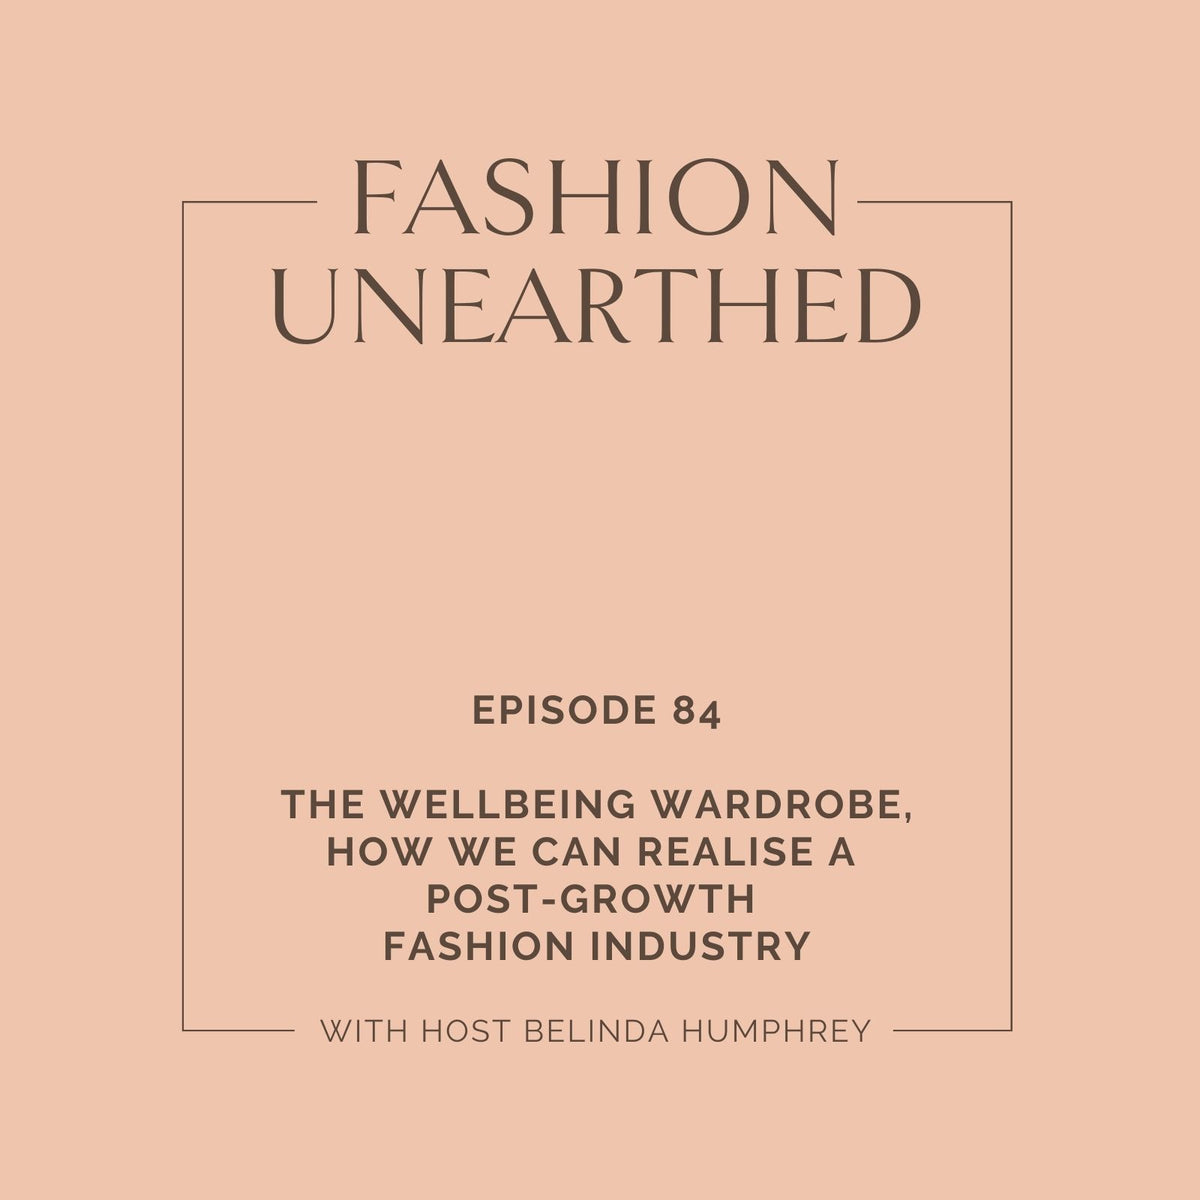 Episode 84: The Wellbeing Wardrobe, how we can realise a post-growth fashion industry